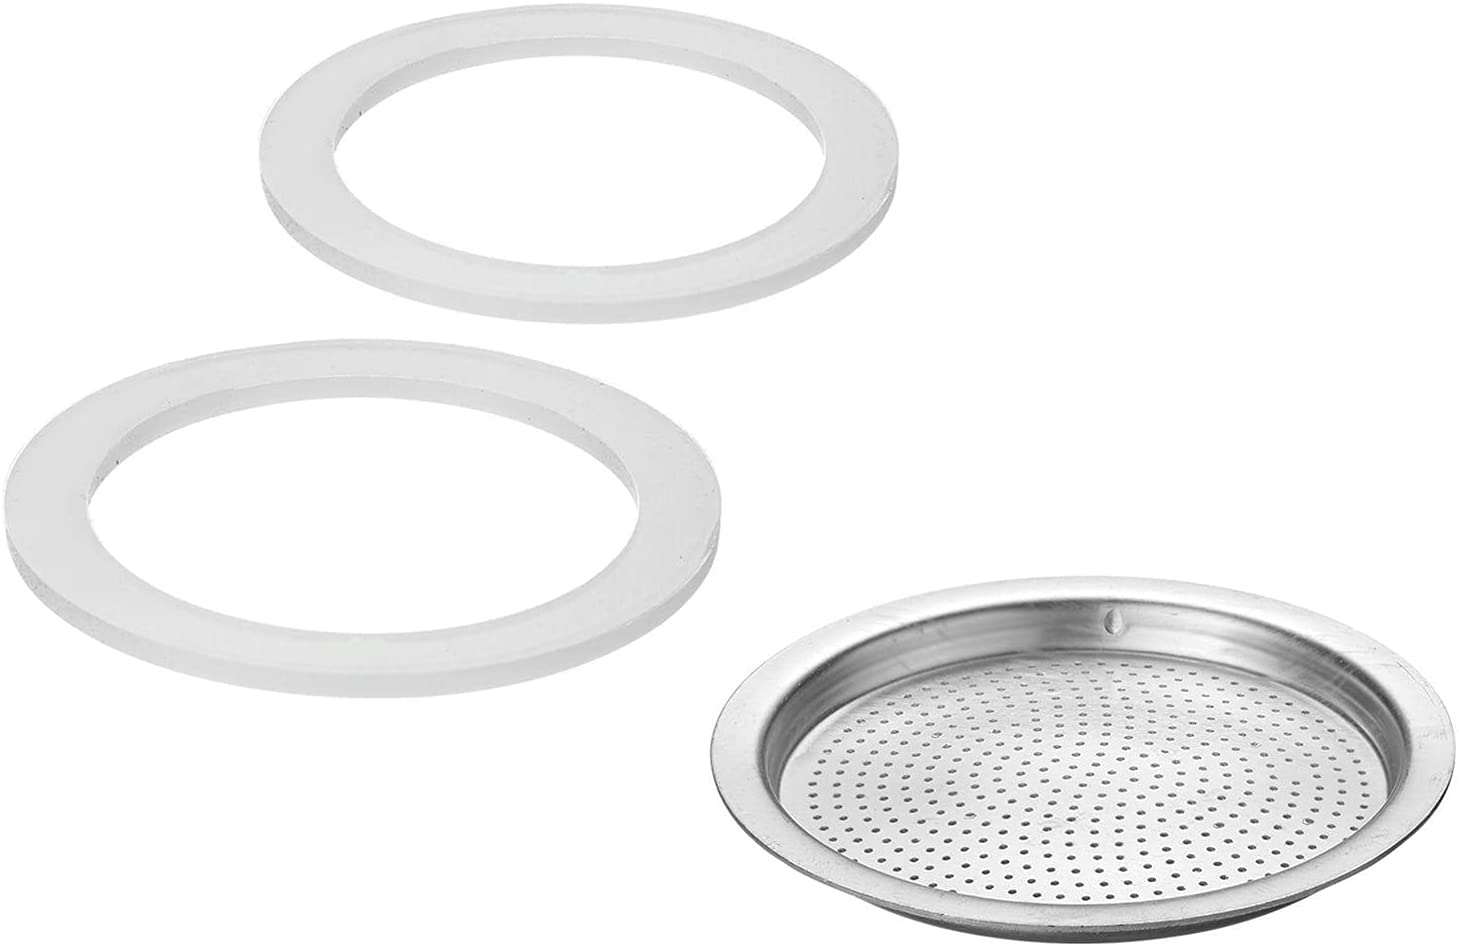 Westmark 2 Replacement Silicone Sealing Rings + 1 Replacement Filter Plate for Espresso Maker 24642260 (9 Cups) Brasilia Silicone/Stainless Steel 2464228E